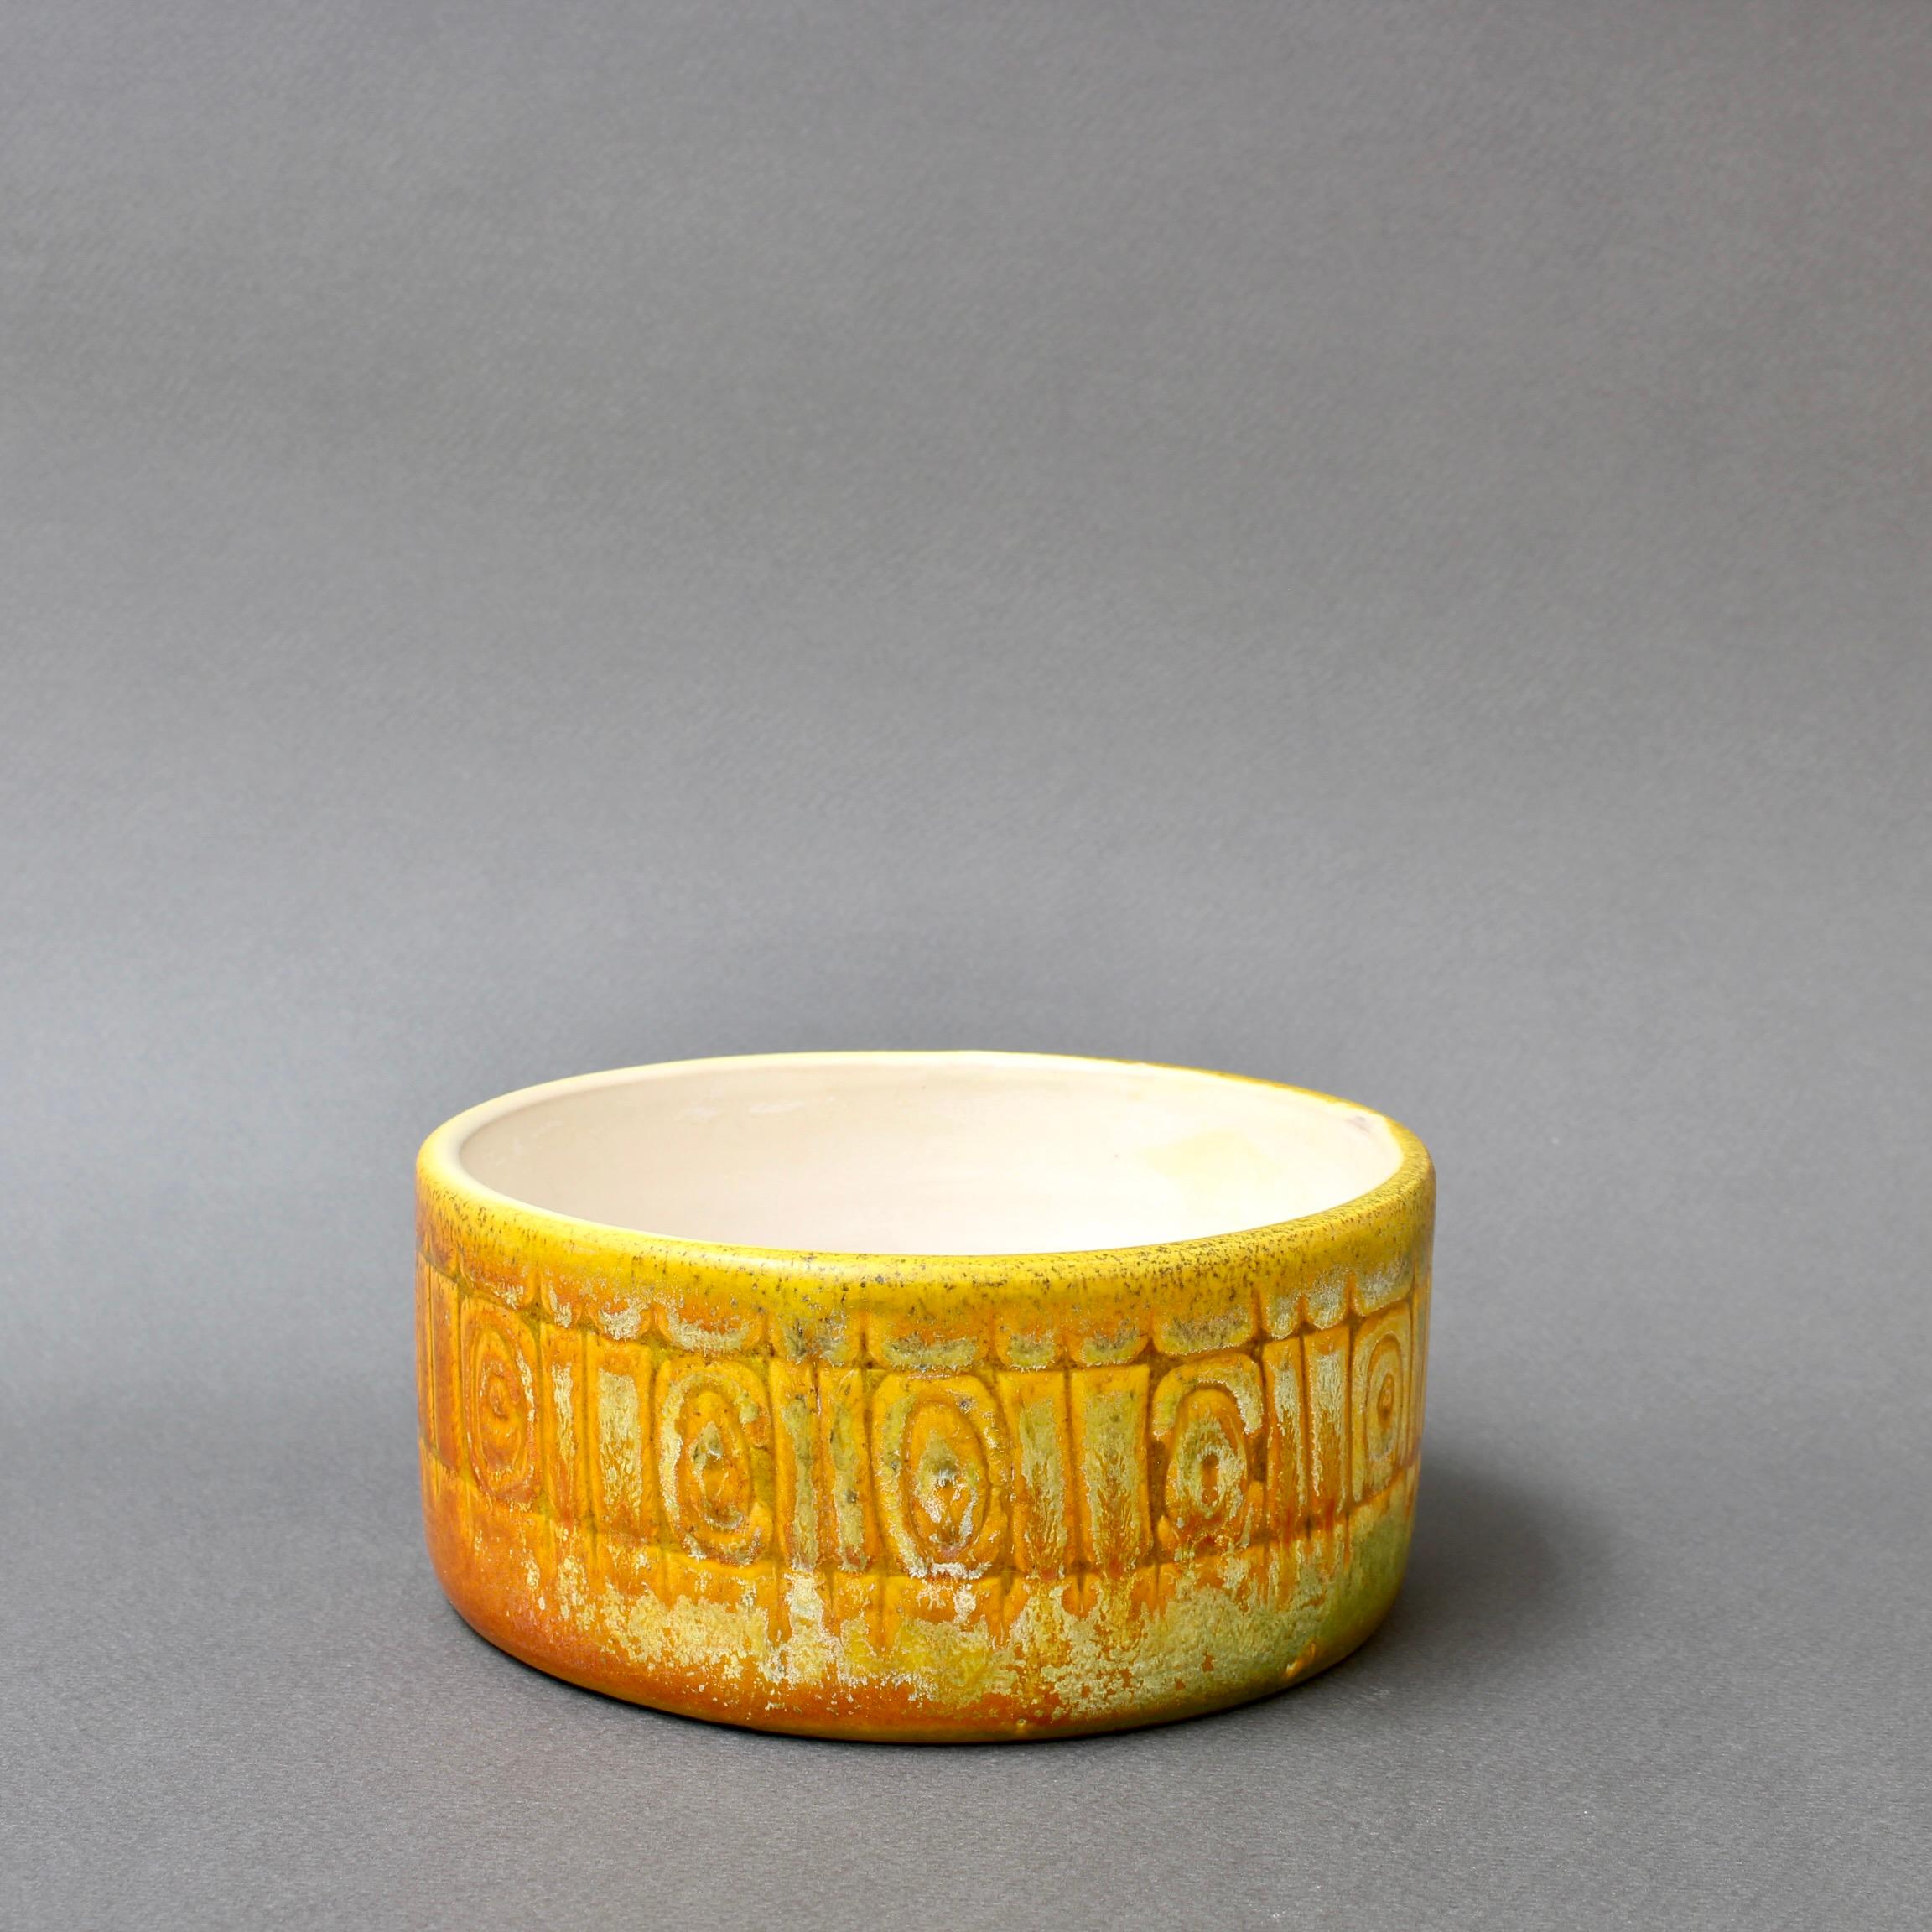 Vintage Italian ceramic bowl by Alessio Tasca (1962). A delightful frieze of geometric shapes encircle the piece. The fading colours in yellow and orange simply add even more character to a vintage piece by this world renowned Italian ceramicist.